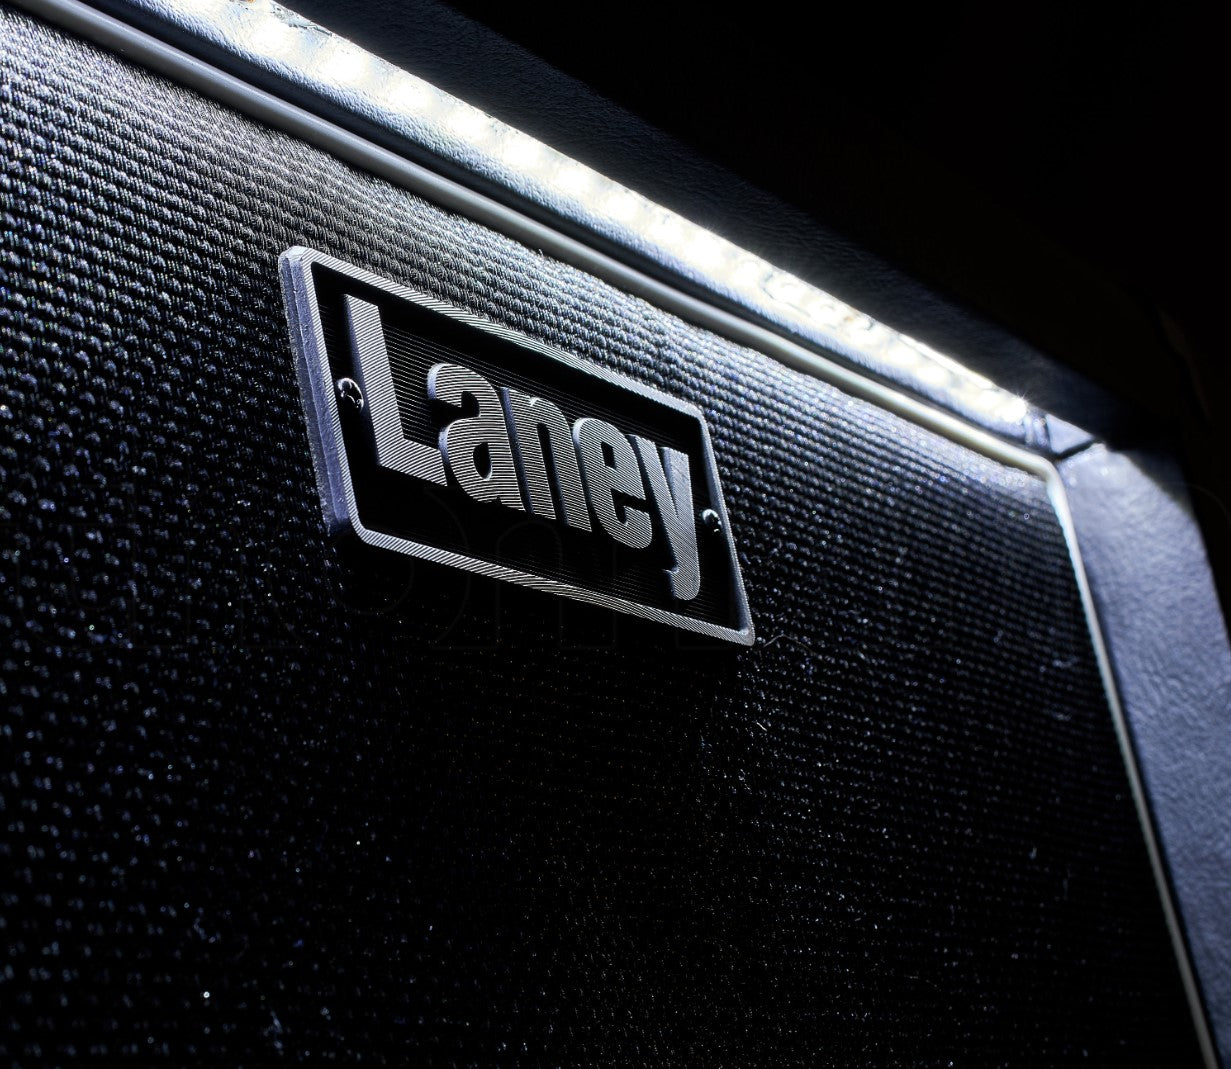 Laney LFR-112 200-Watt Active Guitar Amplifier Speaker Cabinet with Switchable Front Illumination & Full Range Flat Response for Electric Guitars